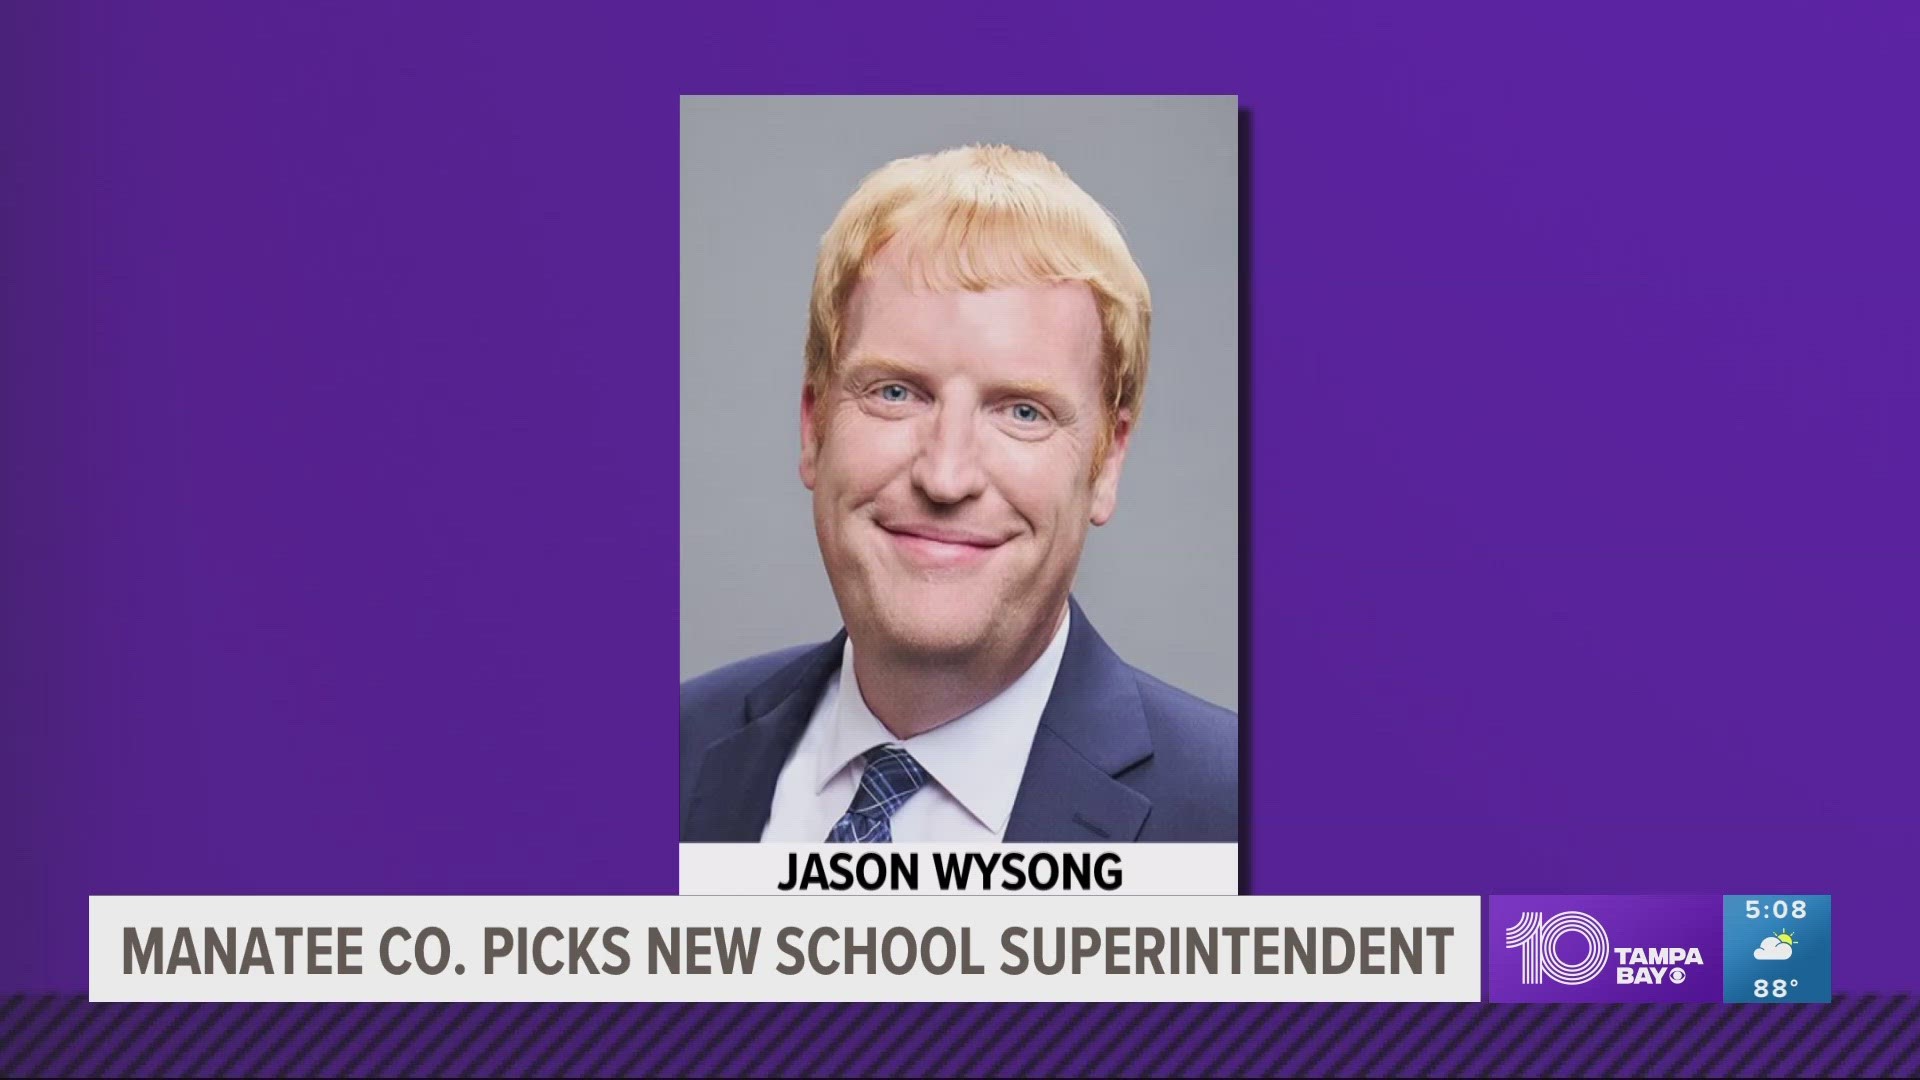 Dr. Jason C. Wysong was selected Tuesday afternoon to replace the outgoing superintendent and lead the district.